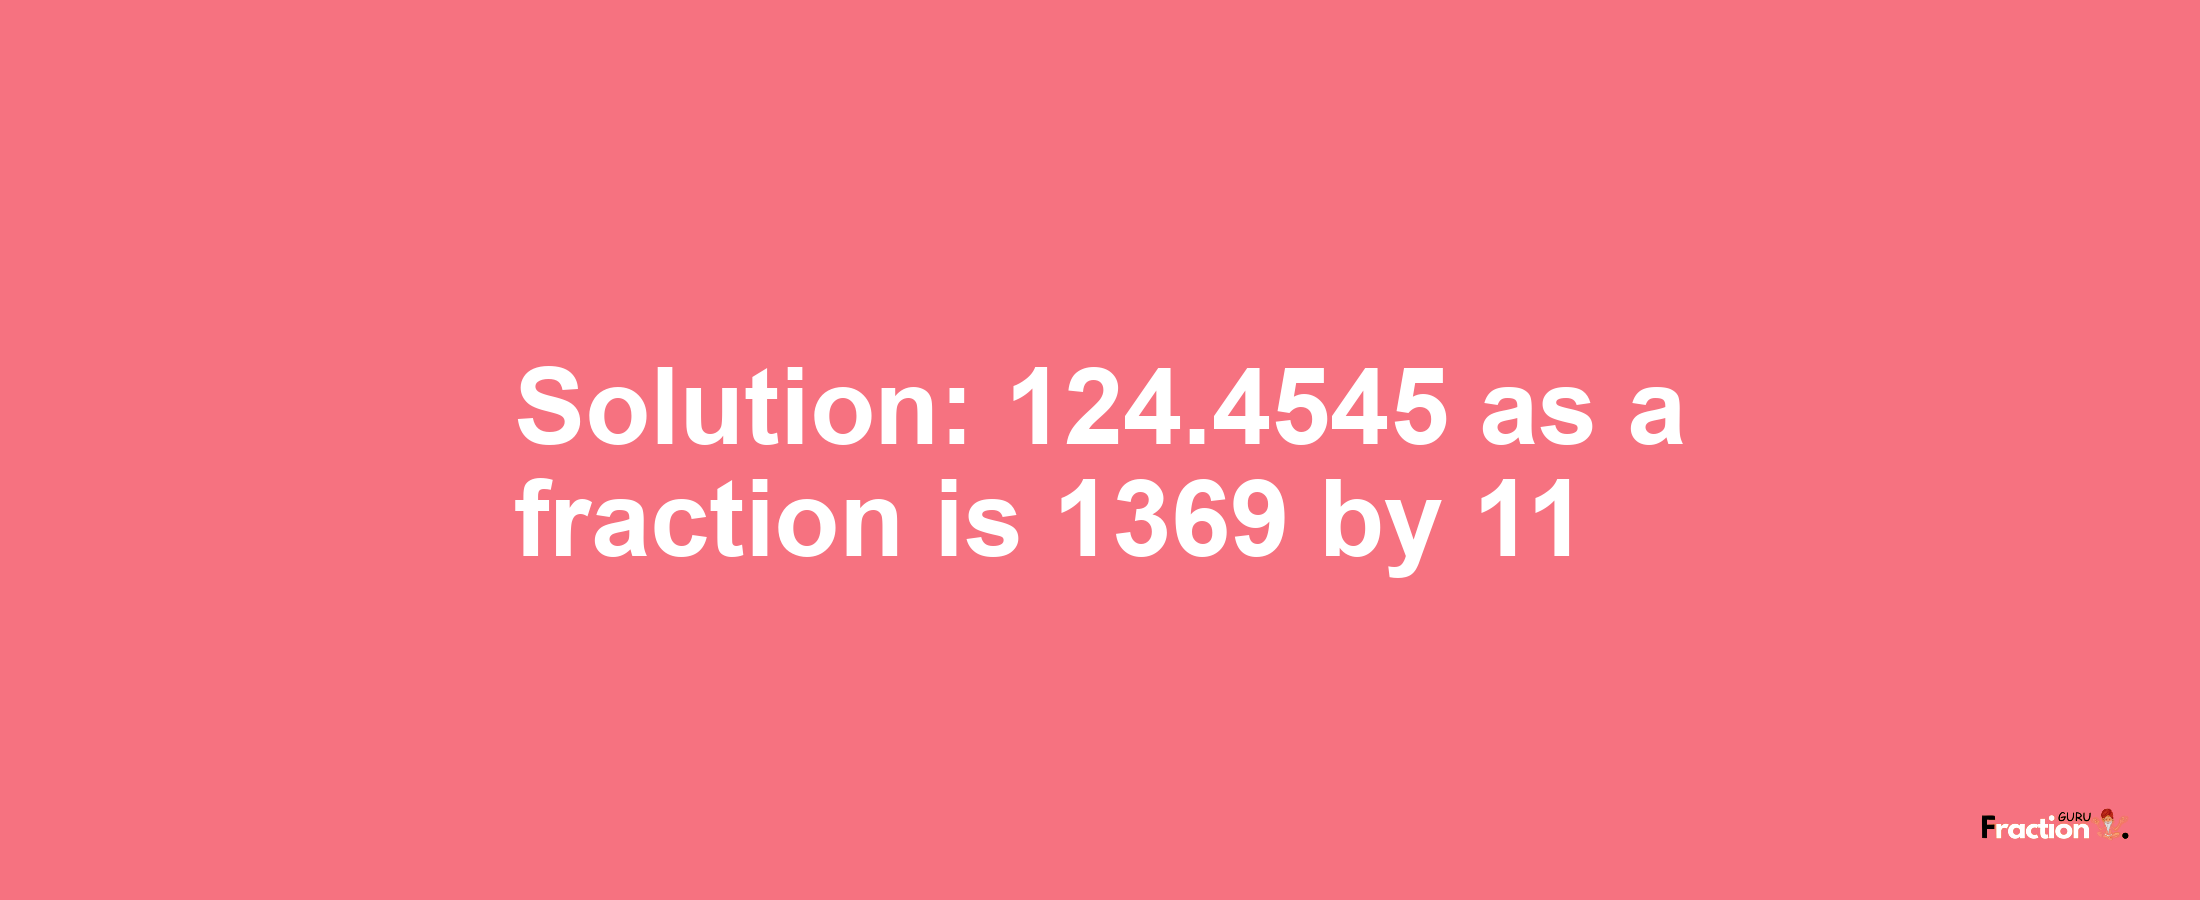 Solution:124.4545 as a fraction is 1369/11